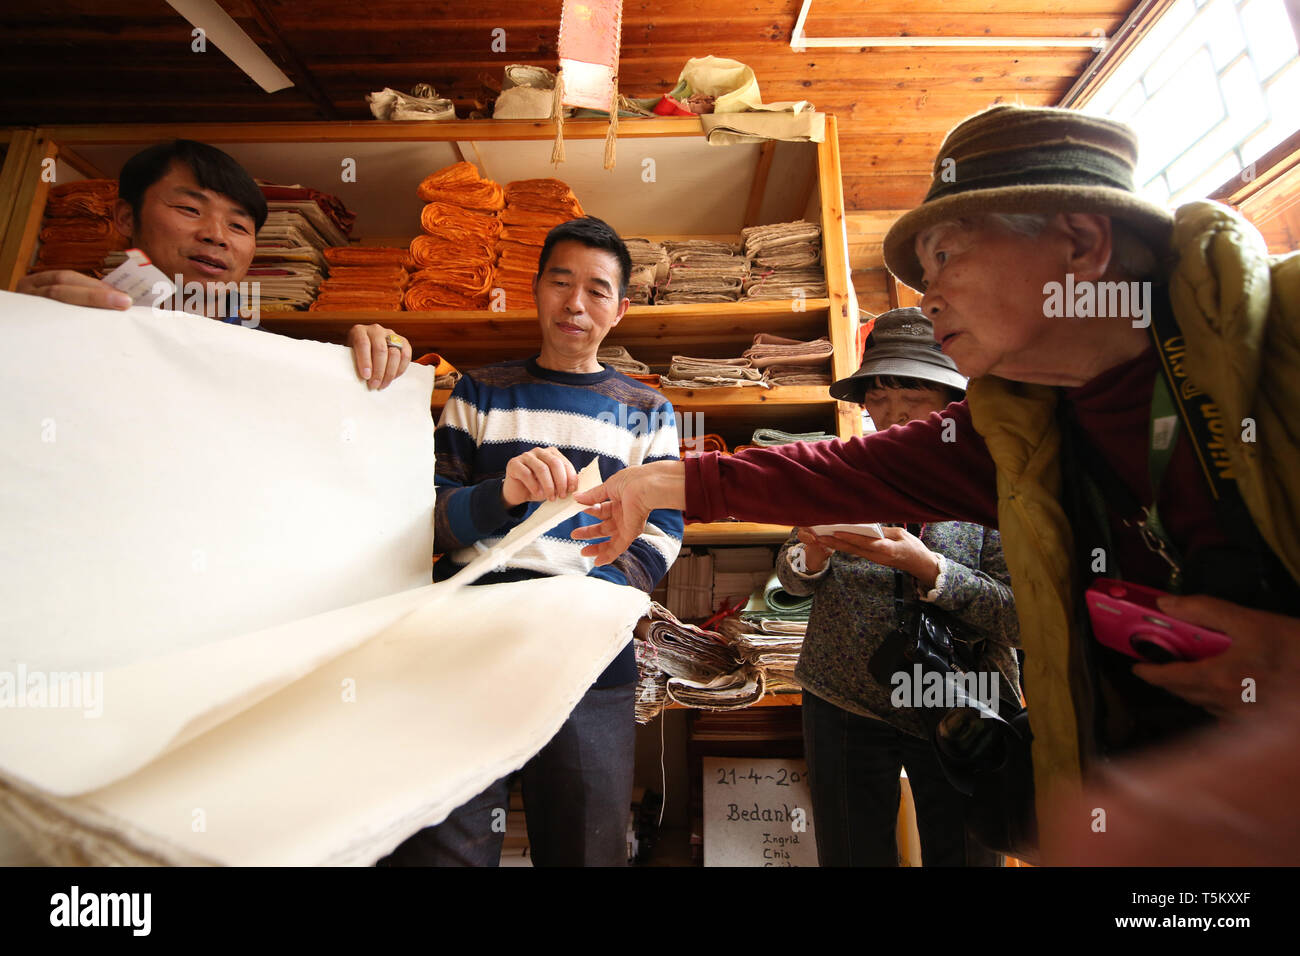 (190425) -- DANZHAI, April 25, 2019 (Xinhua) -- Wang Xingwu (2nd L), a papermaker, introduces his paper product to Japanese tourists at a workshop in Shiqiao Village of Danzhai County, southwest China's Guizhou Province, April 24, 2019. Wang Xingwu, 53, a national intangible cultural heritage inheritor in papermaking, learned the papermaking technique from his family as a child. Besides exerting the old papermaking technique to its full potential, Wang keeps raising product quality and improving the making procedure. With the involvement of plants in the papermaking process, he has created mor Stock Photo